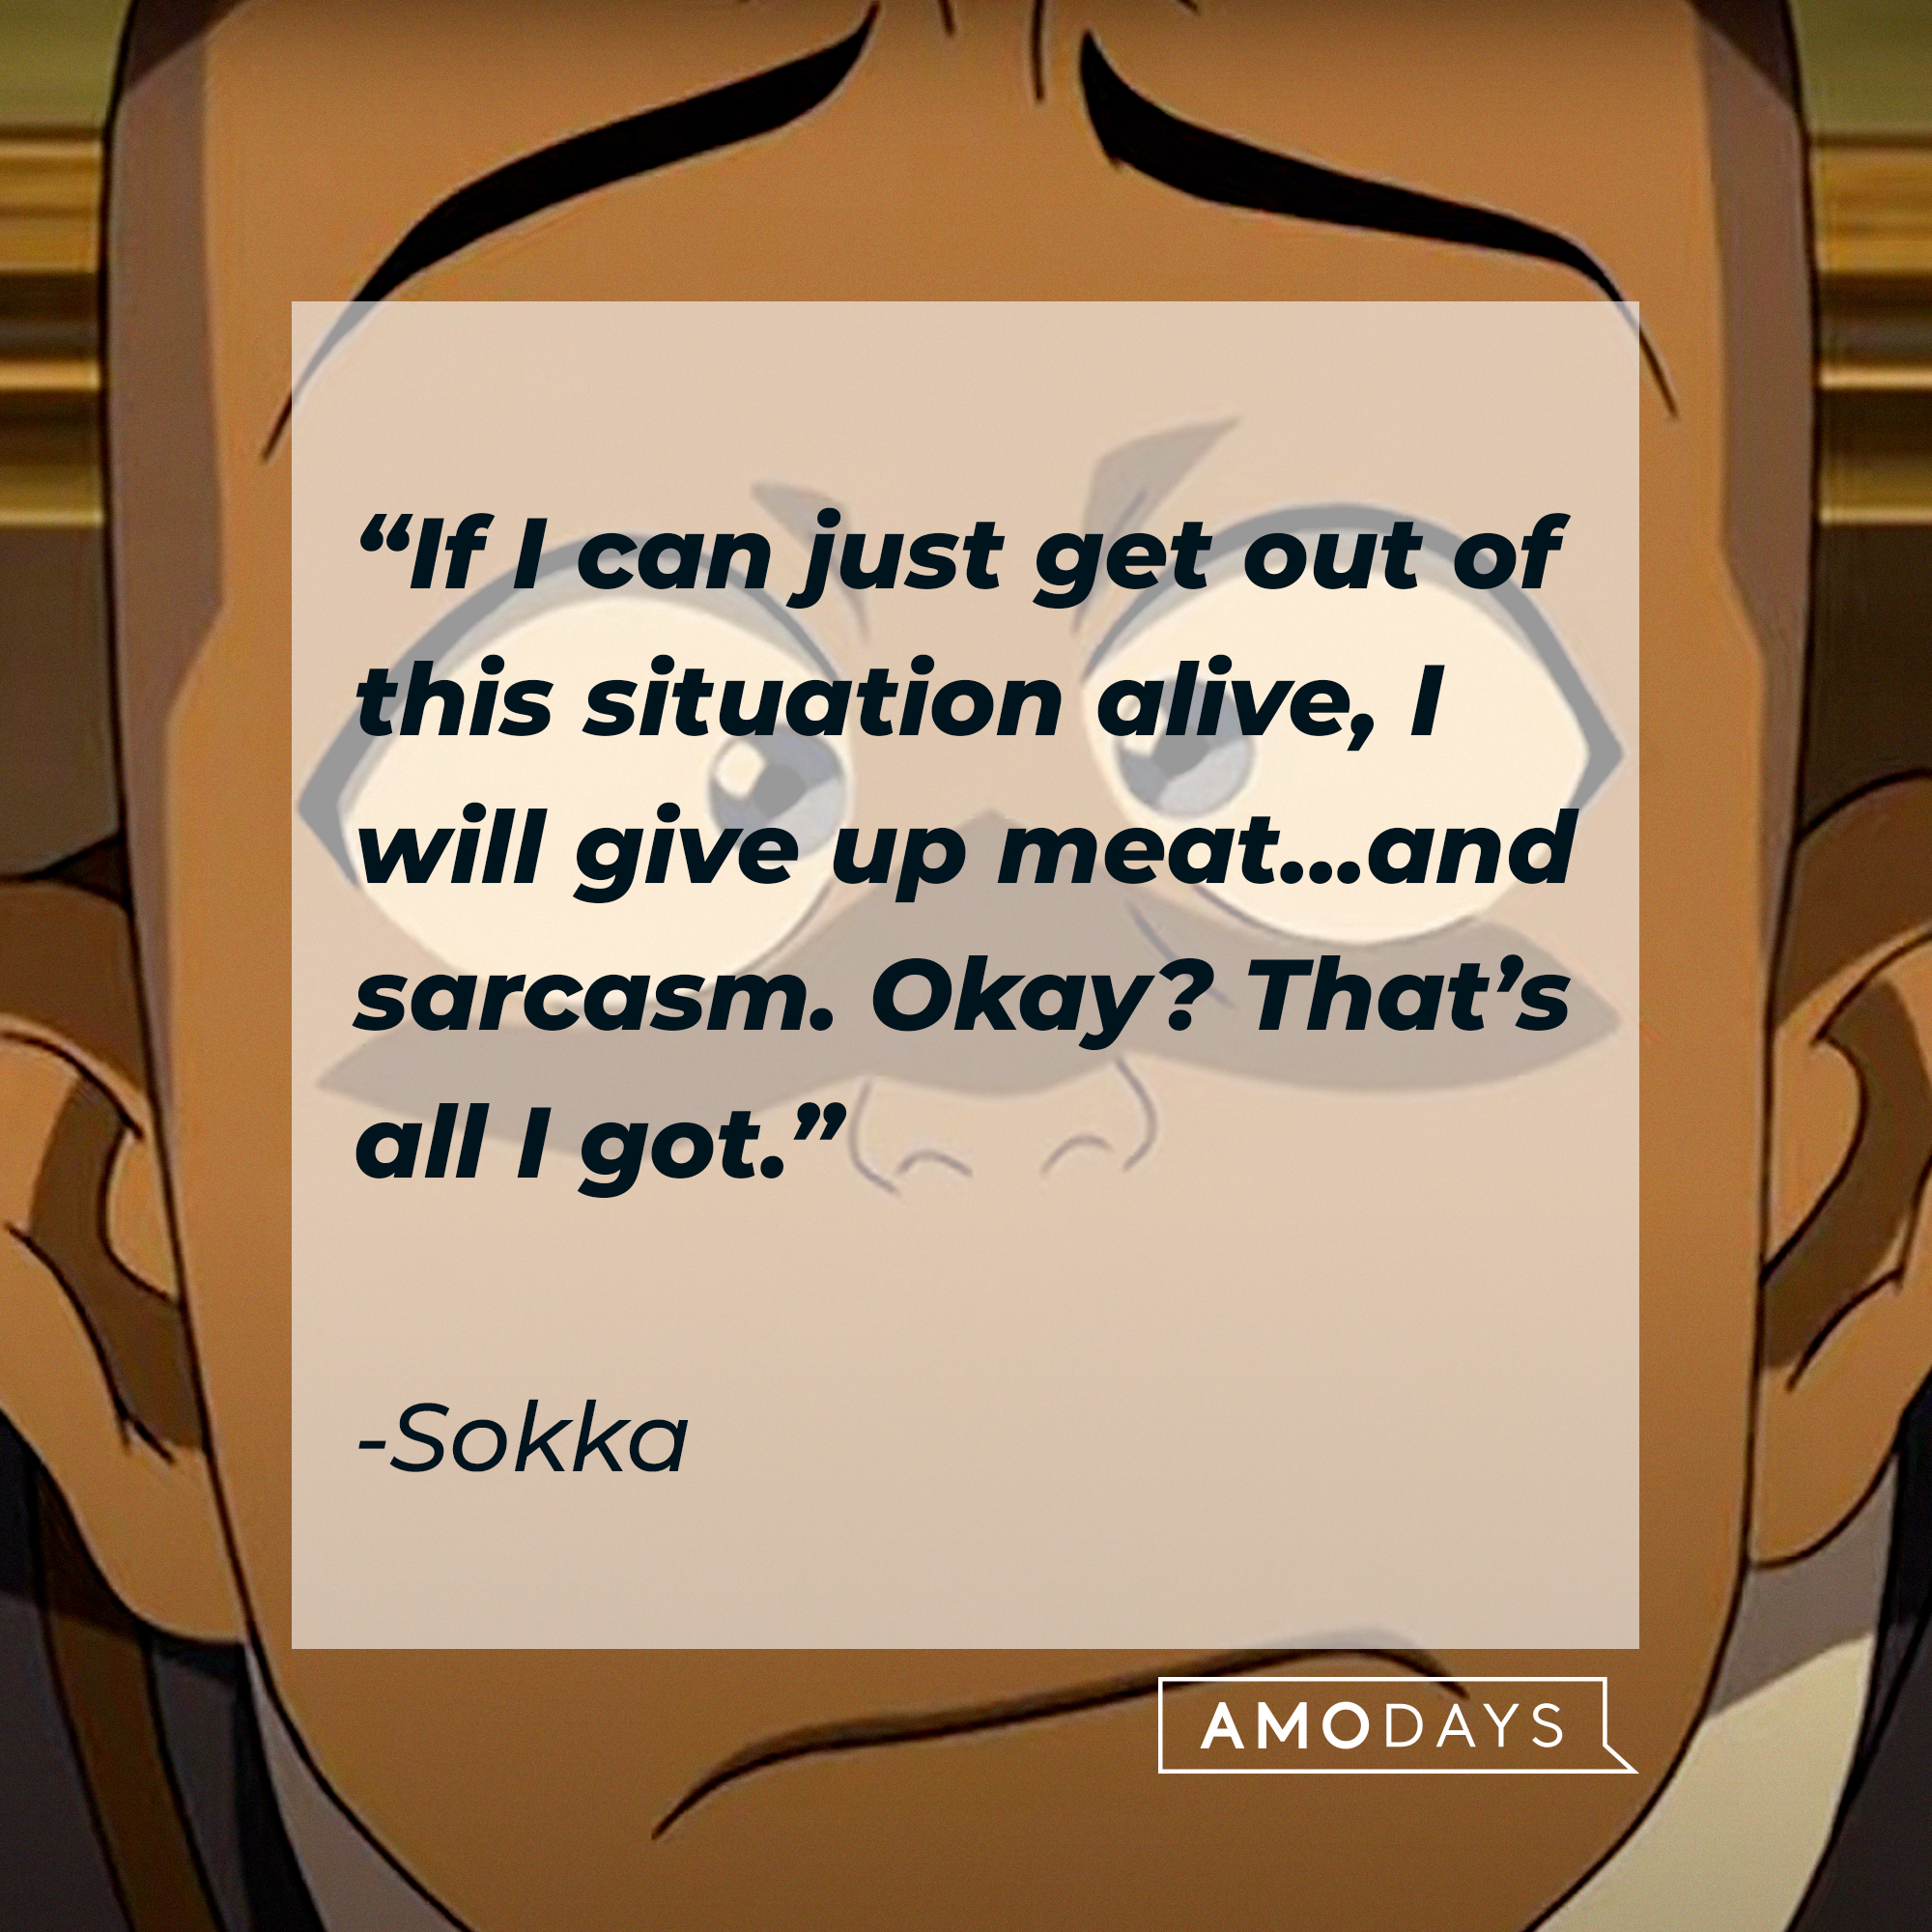 Sokka, with his quote: “If I can just get out of this situation alive, I will give up meat... and sarcasm. Okay? That’s all I got.” | Source: Youtube.com/TeamAvatar